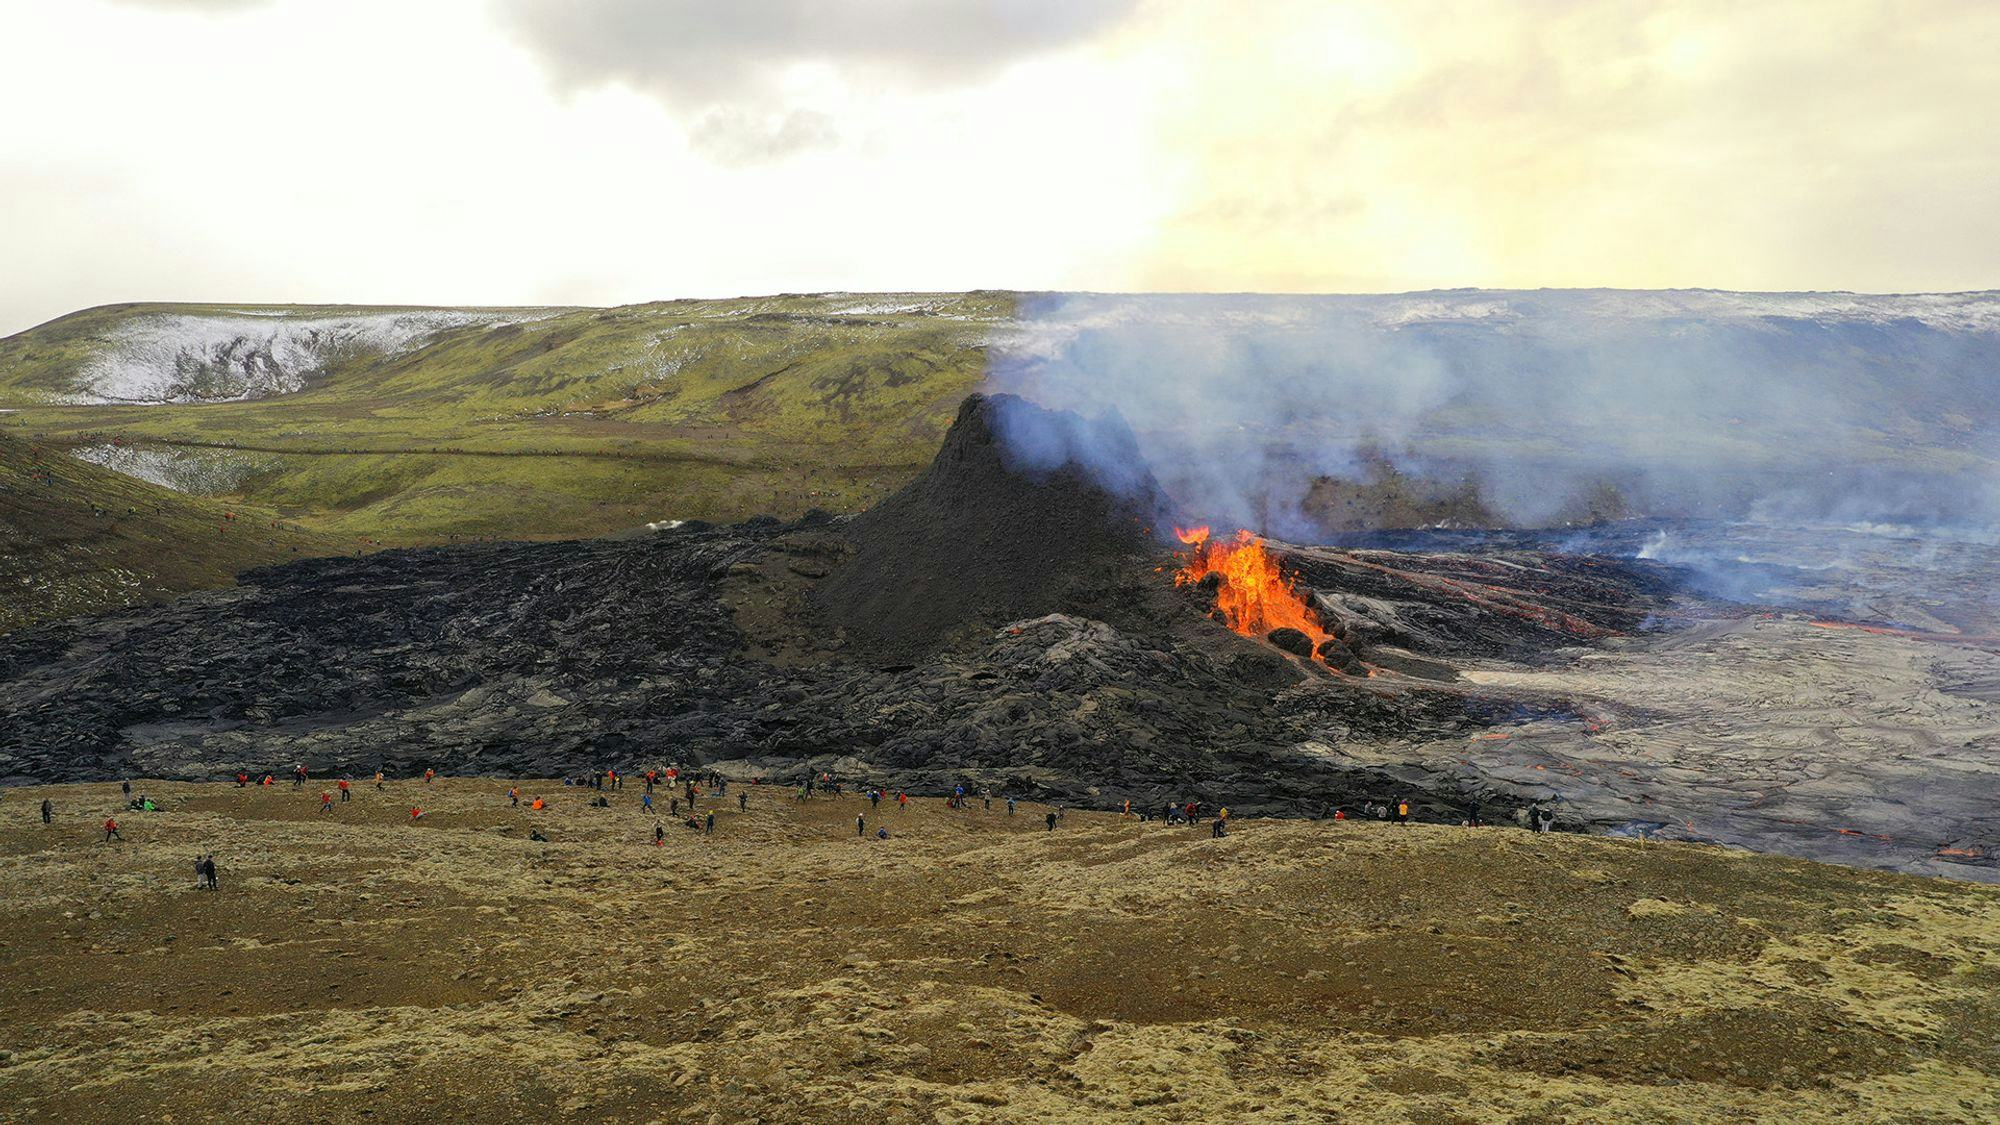 A large crowd of spectators gathers around the eruption